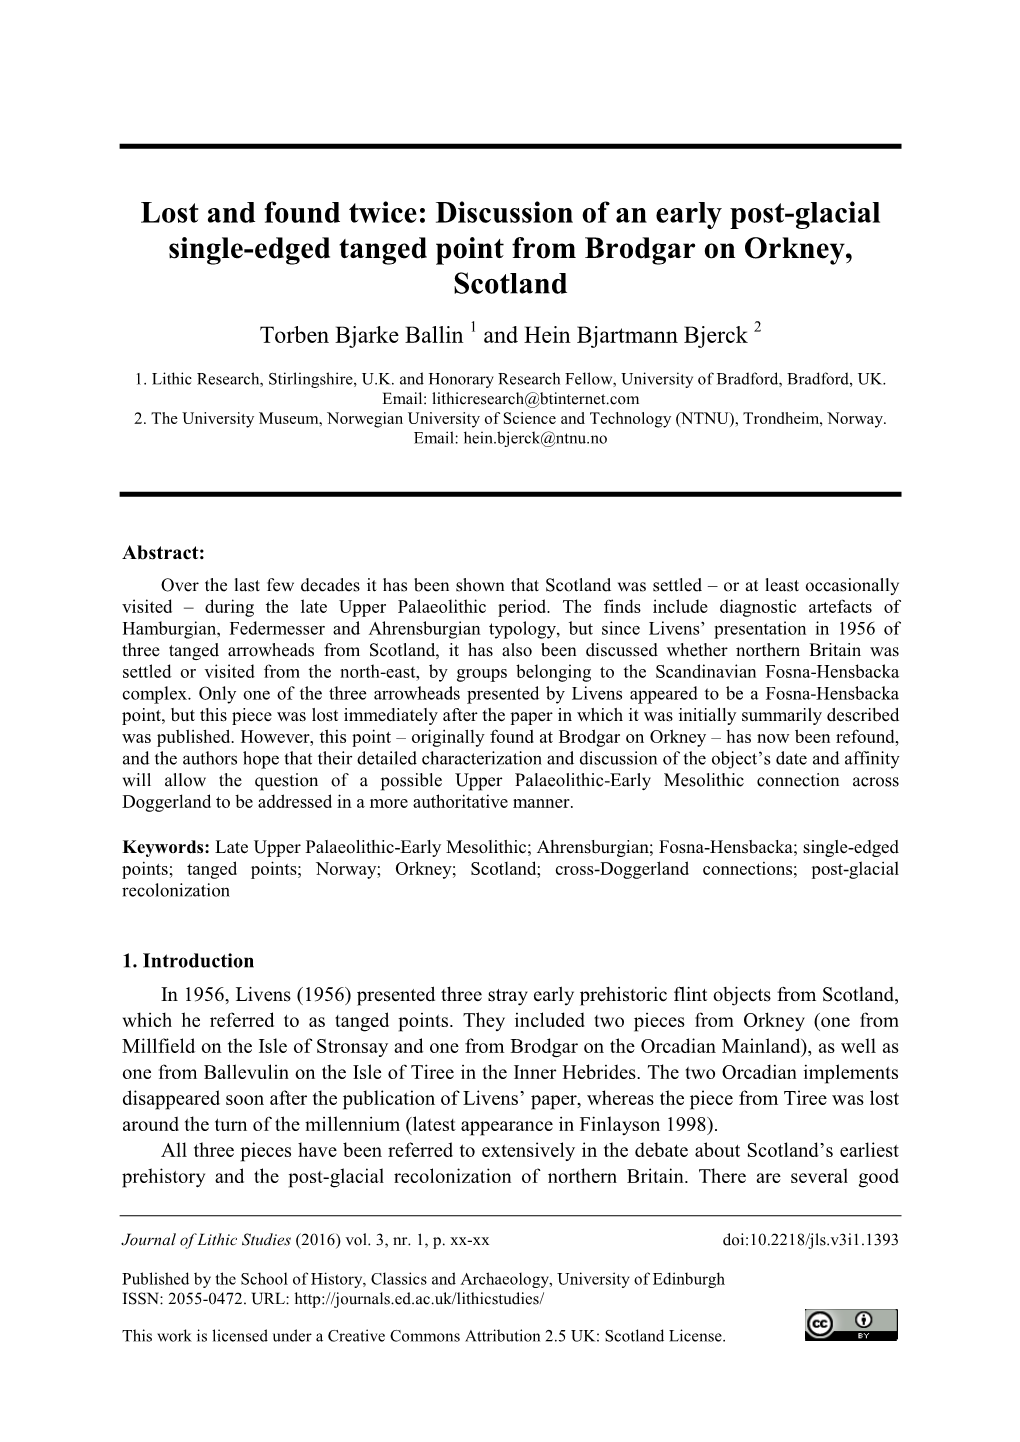 Discussion of an Early Post-Glacial Single-Edged Tanged Point from Brodgar on Orkney, Scotland Torben Bjarke Ballin 1 and Hein Bjartmann Bjerck 2